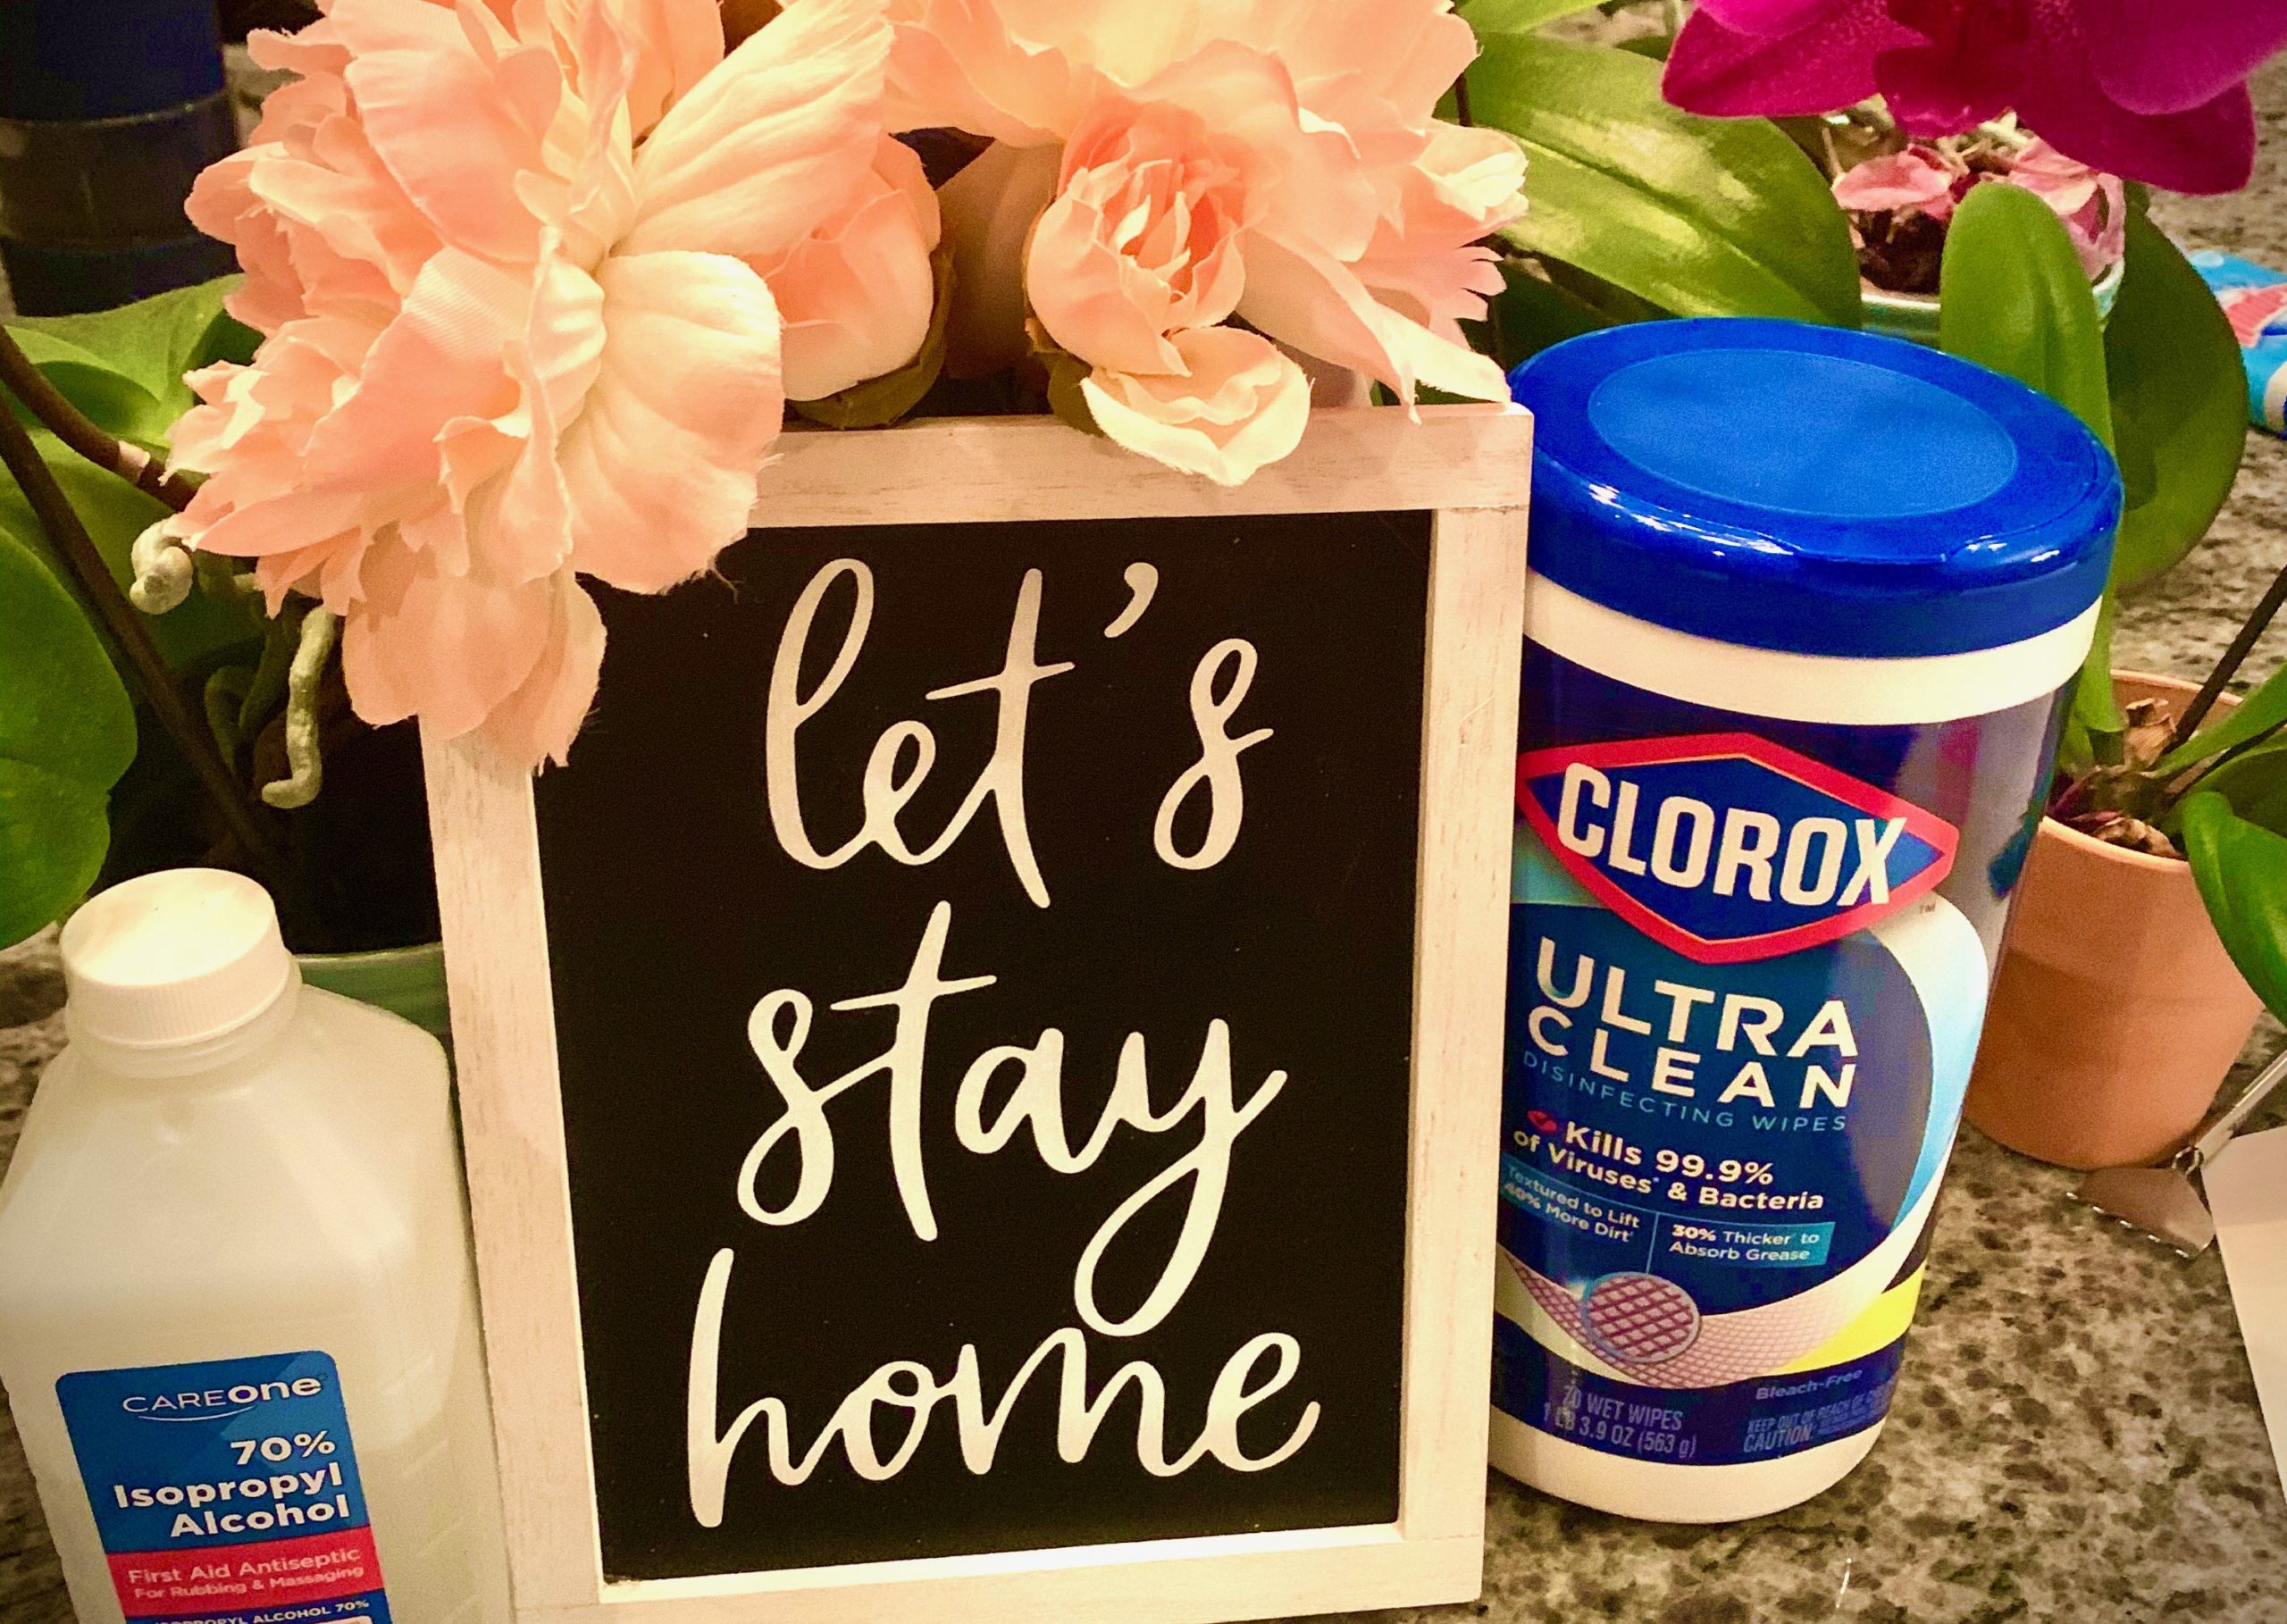 Chalkboard sign hand-lettered with "Let's Stay Home" surrounded by flowers and Clorox wipes